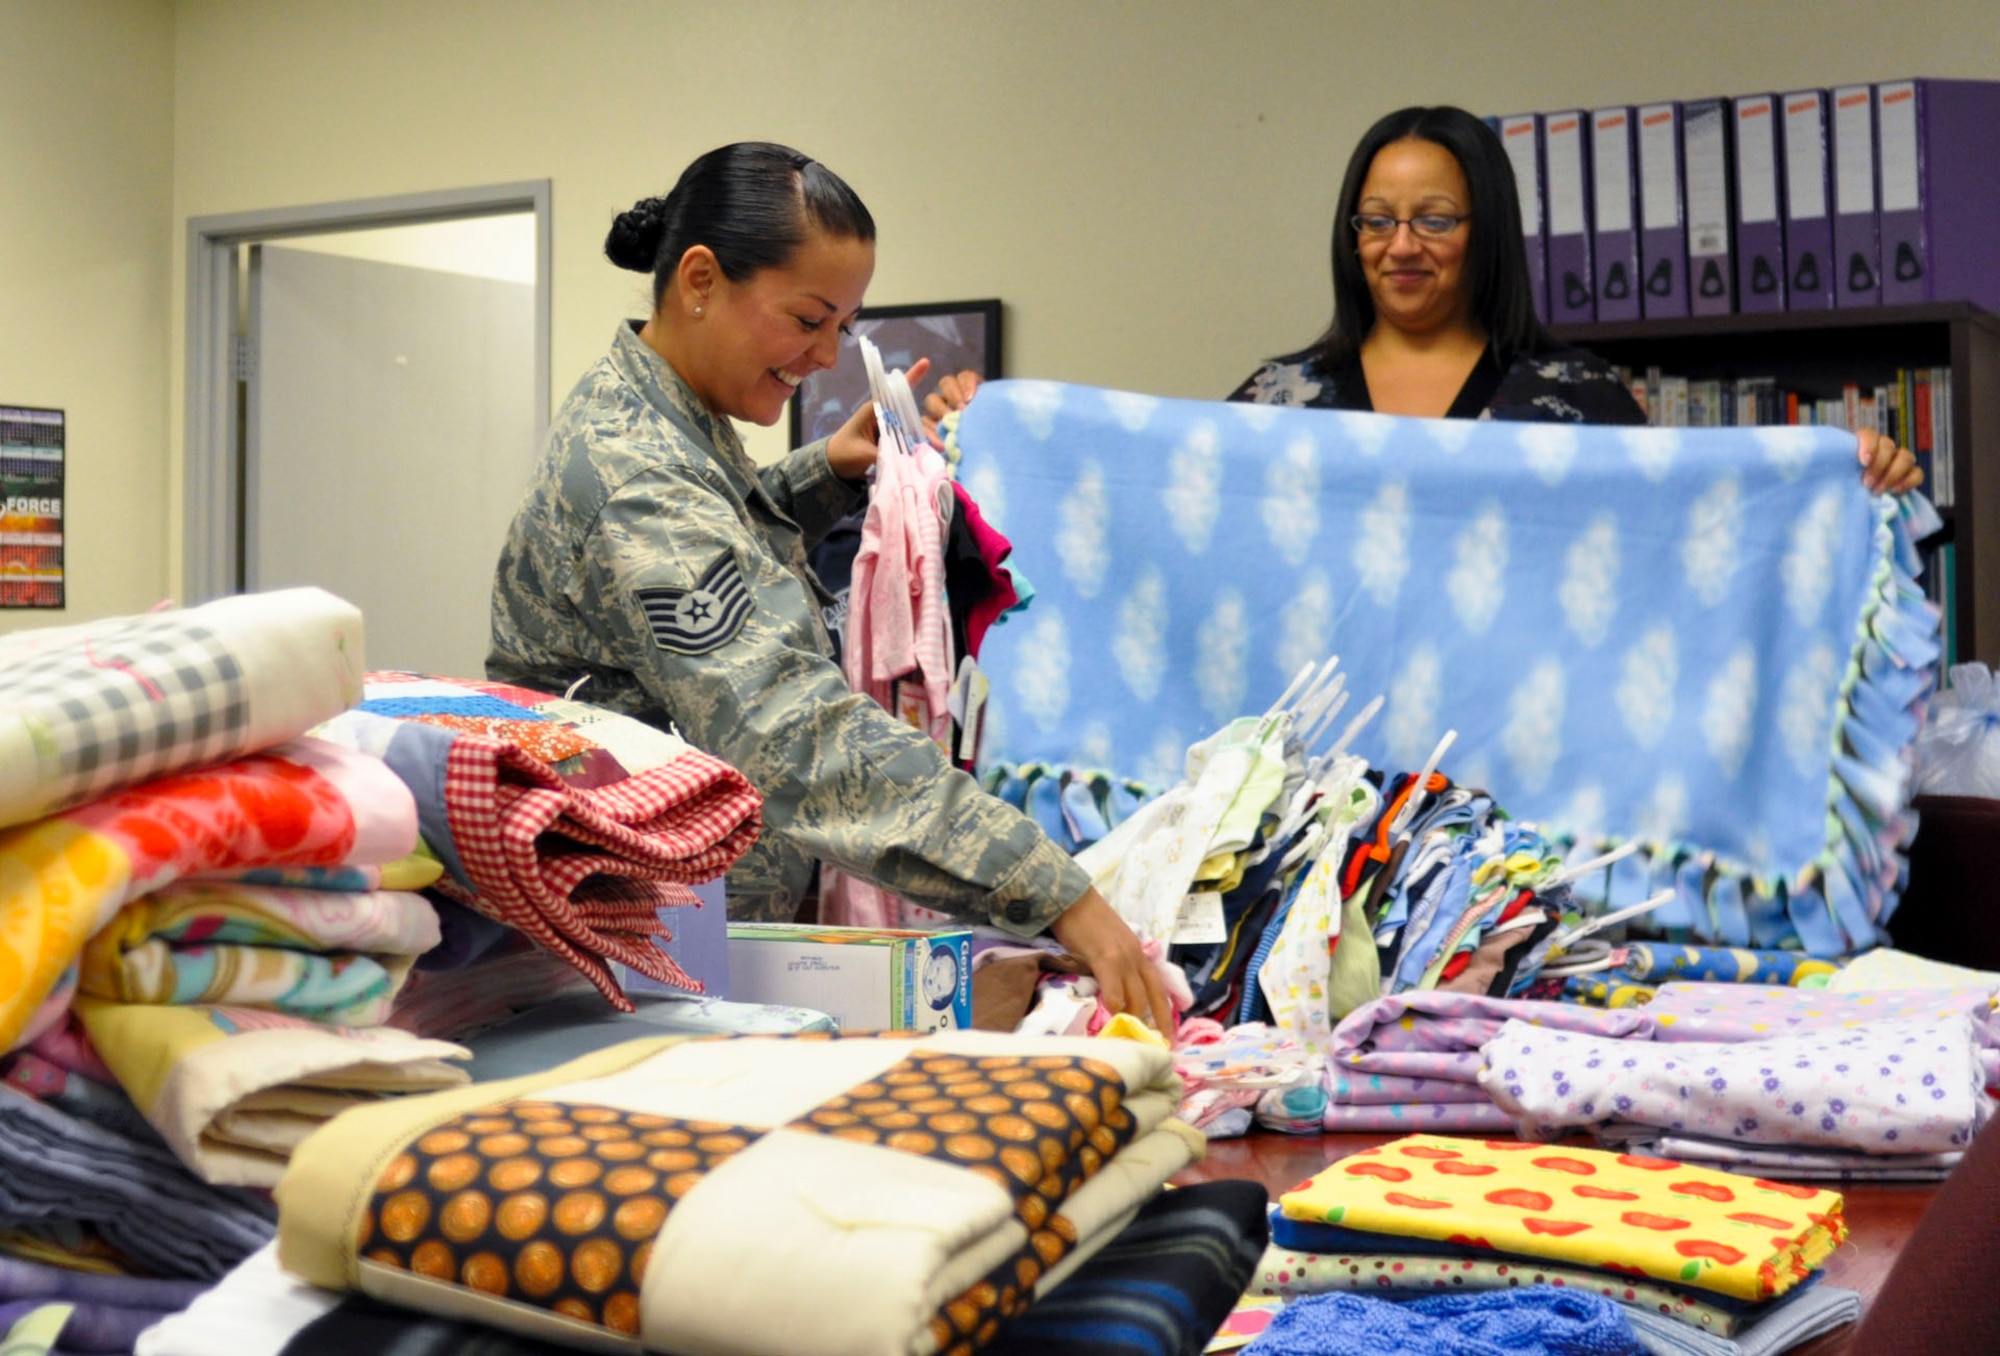 Tech. Sgt. Crystal Goff (left), 912th Air Refueling Squadron Airman and Family Readiness NCO, and Devina Whitt-Snyder, 452nd Air Mobility Wing Airman and Family Readiness administrative assistant, sort though donated baby clothing and blankets for the Bundles for Babies class at March Air Reserve Base, Calif., June 7, 2011. Bundles for Babies is an Air Force Aid Society sponsored course that helps expectant parents be prepared for the costs of raising a child. (U.S. Air Force photo/Megan Just)